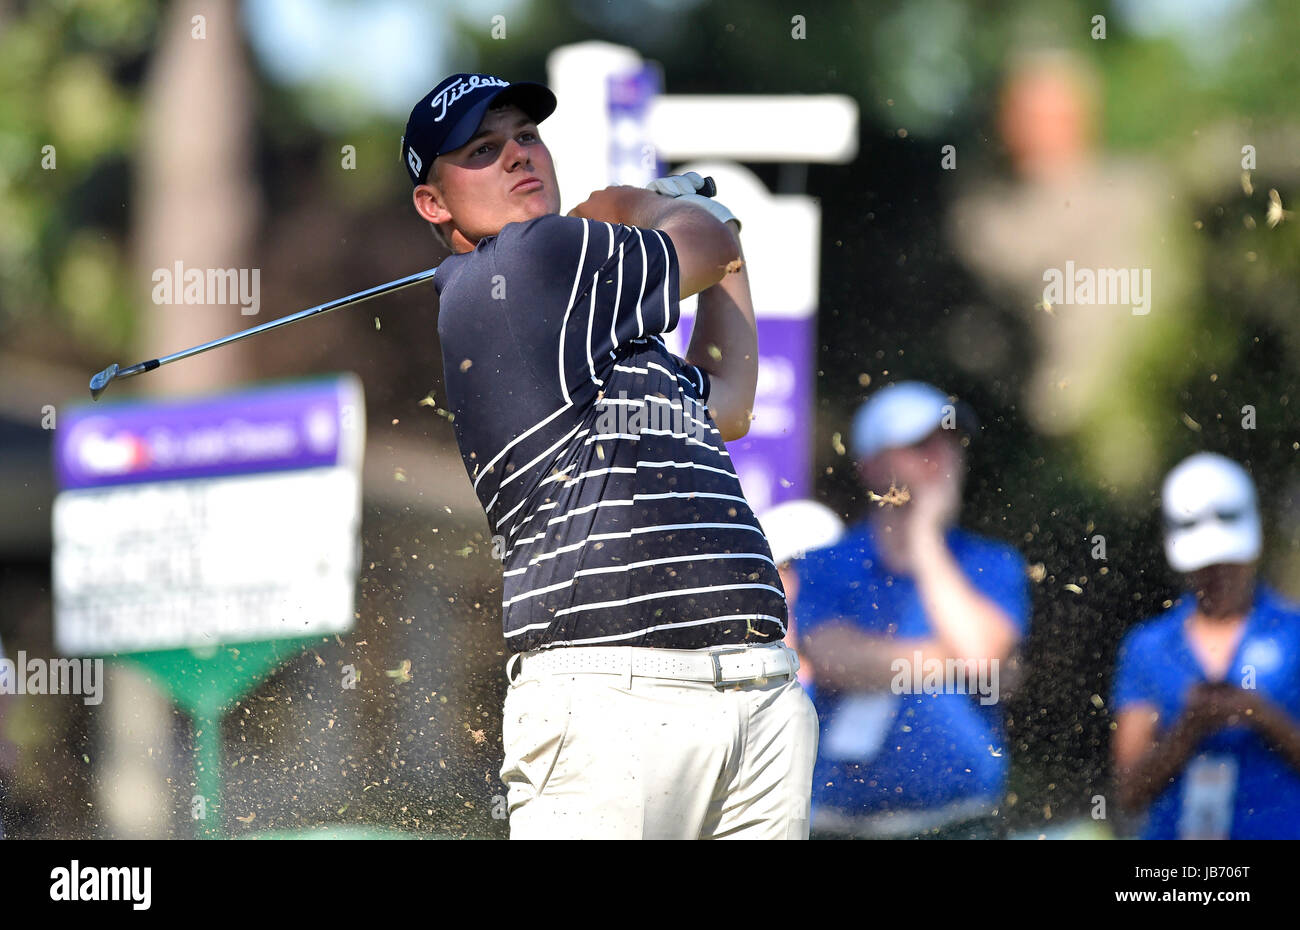 Memphis, TN, USA. 09th June, 2017. Braden Thornberry tees off from the eleventh tee box during the second round of the FedEx St. Jude Classic at TPC Southwind in Memphis, TN. Austin McAfee/CSM/Alamy Live News Stock Photo